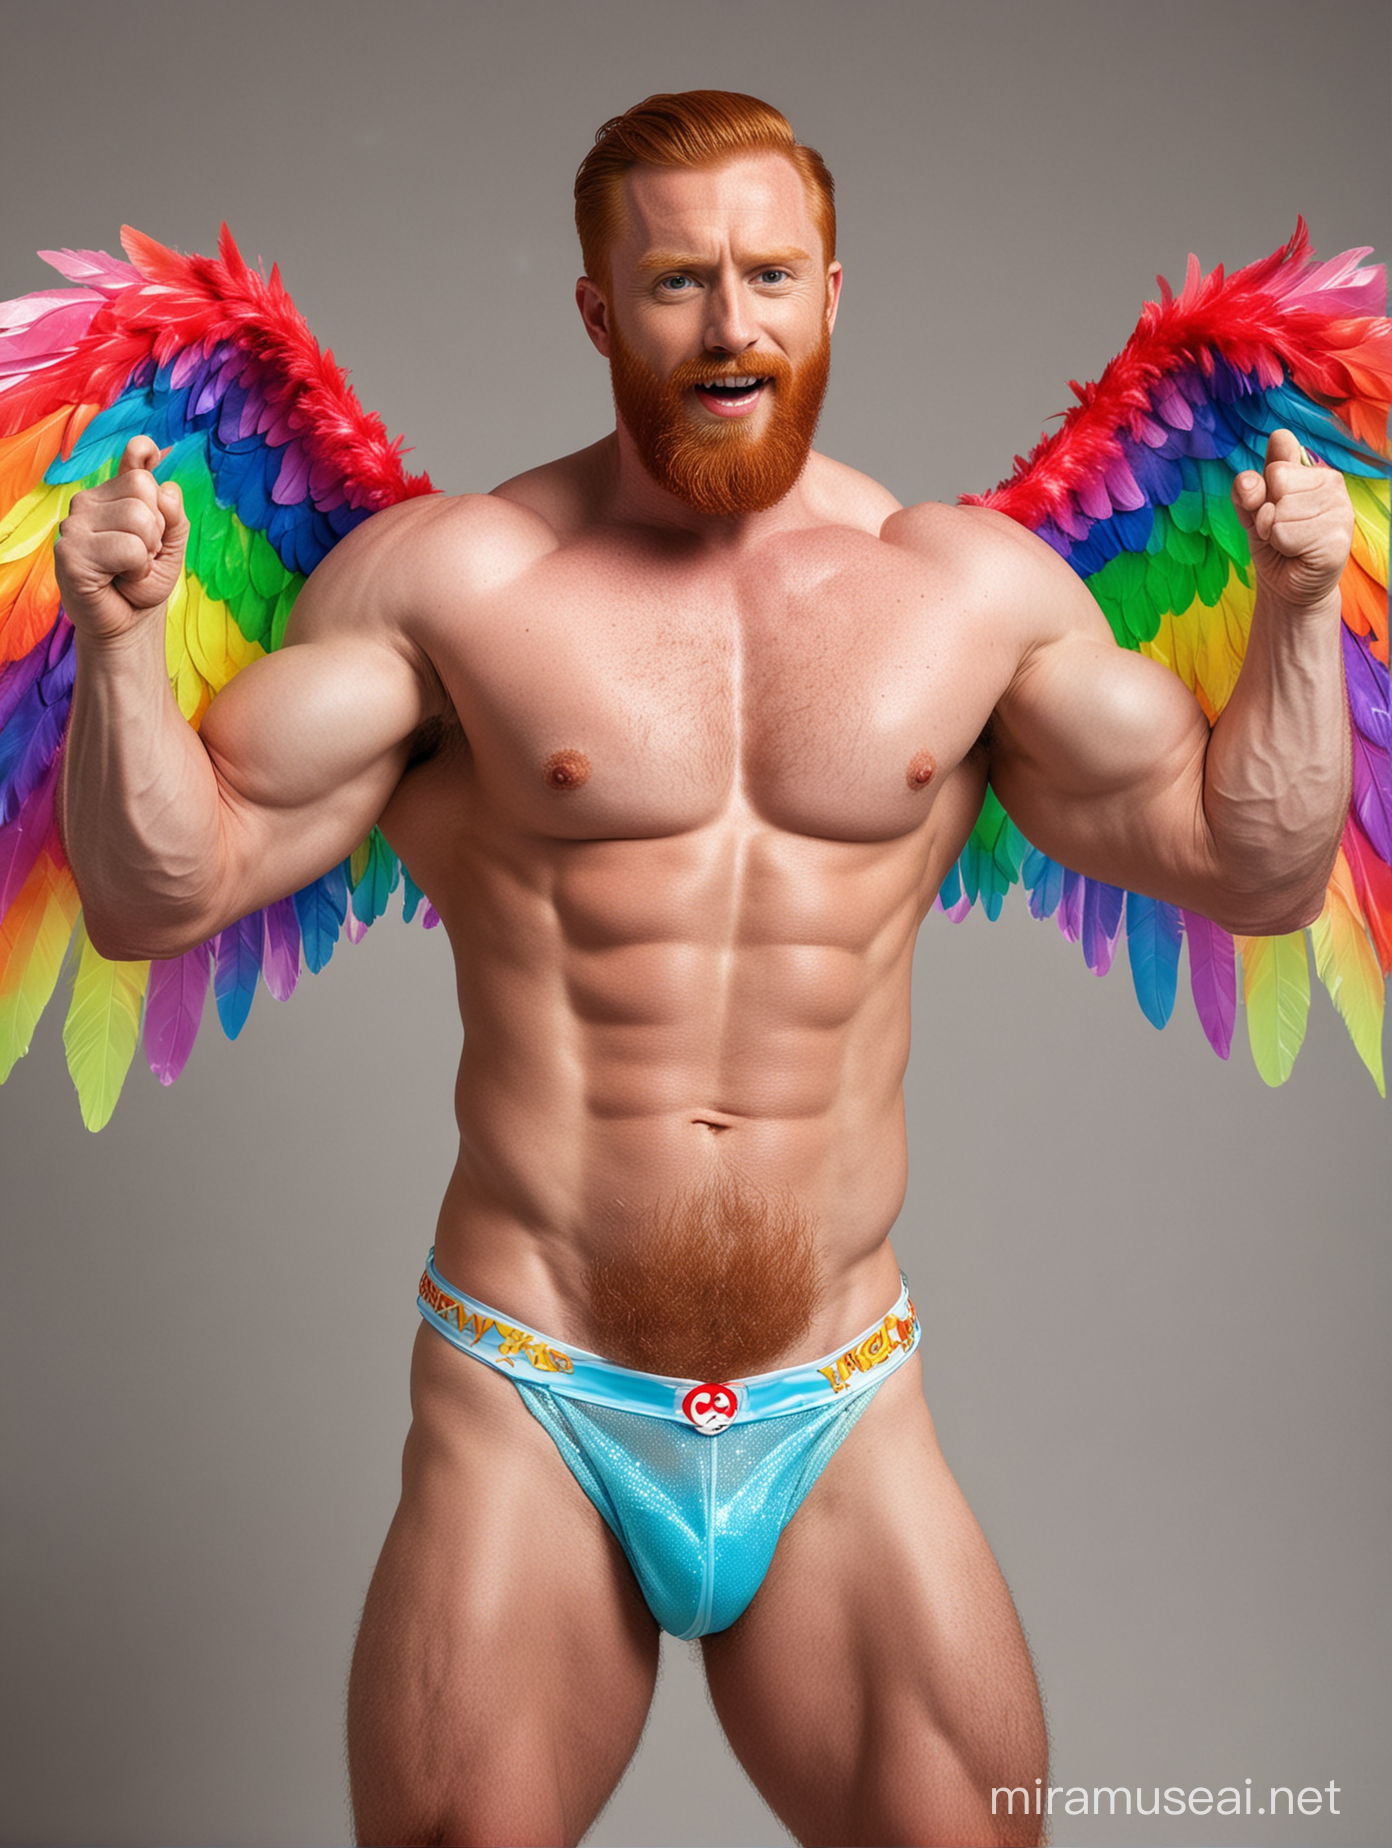 Muscular Redhead Bodybuilder Flexing Arm with RainbowColored Eagle Wings Jacket and Doraemon